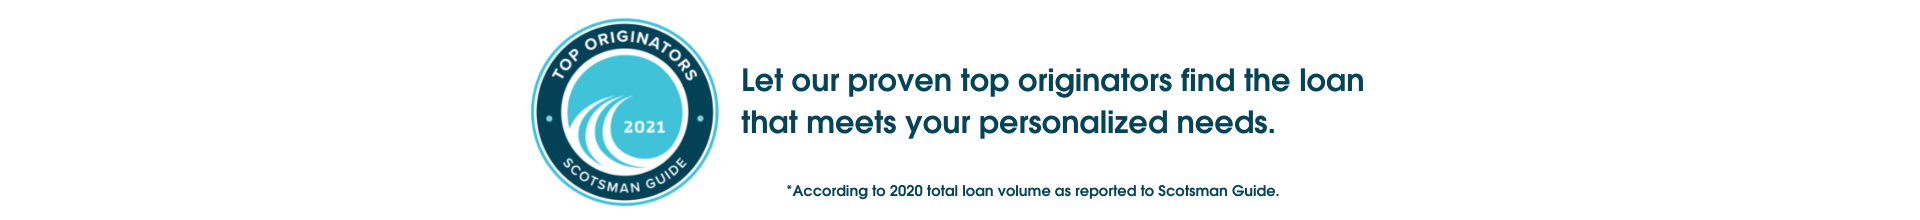 TOP ORIGINATORS 2021 SCOTSMAN GUIDE. Let our proven top originators find the loan that meets your personalized needs. According to 2020 total loan volume as reported to Scotsman Guide.